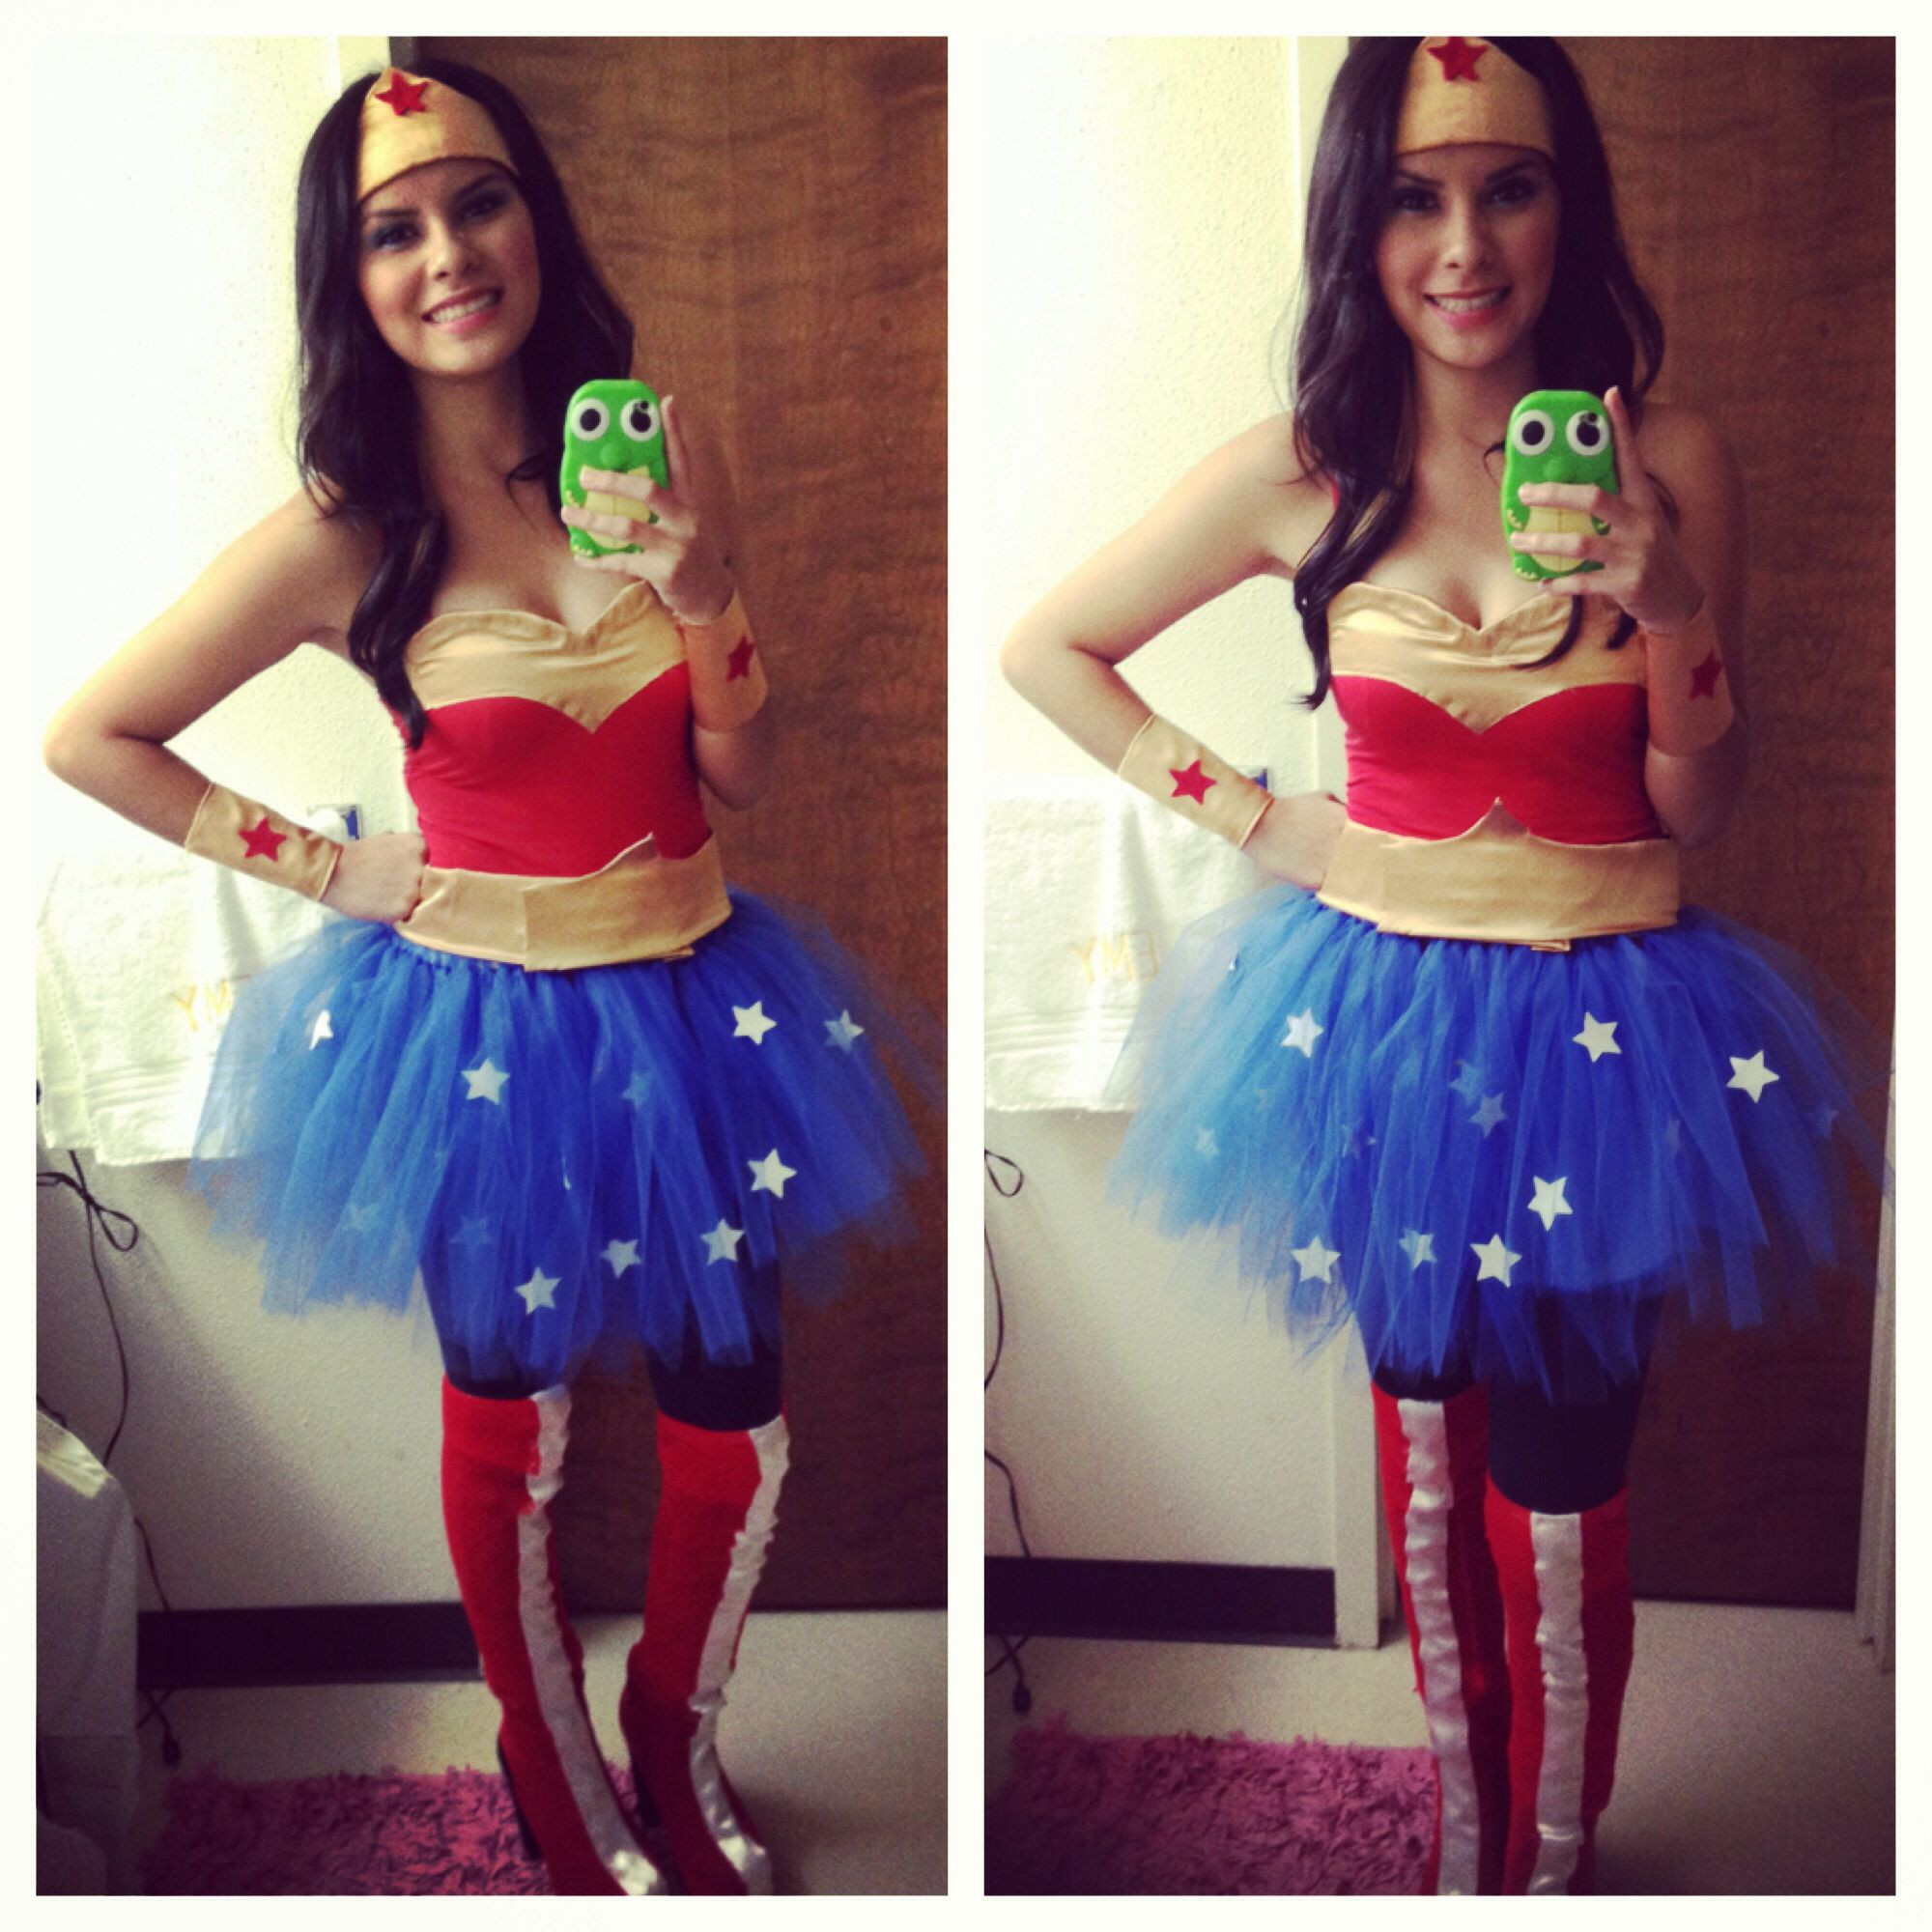 Wonder Woman Halloween Costume DIY
 Made this Wonder Woman costume from head to toe Happy